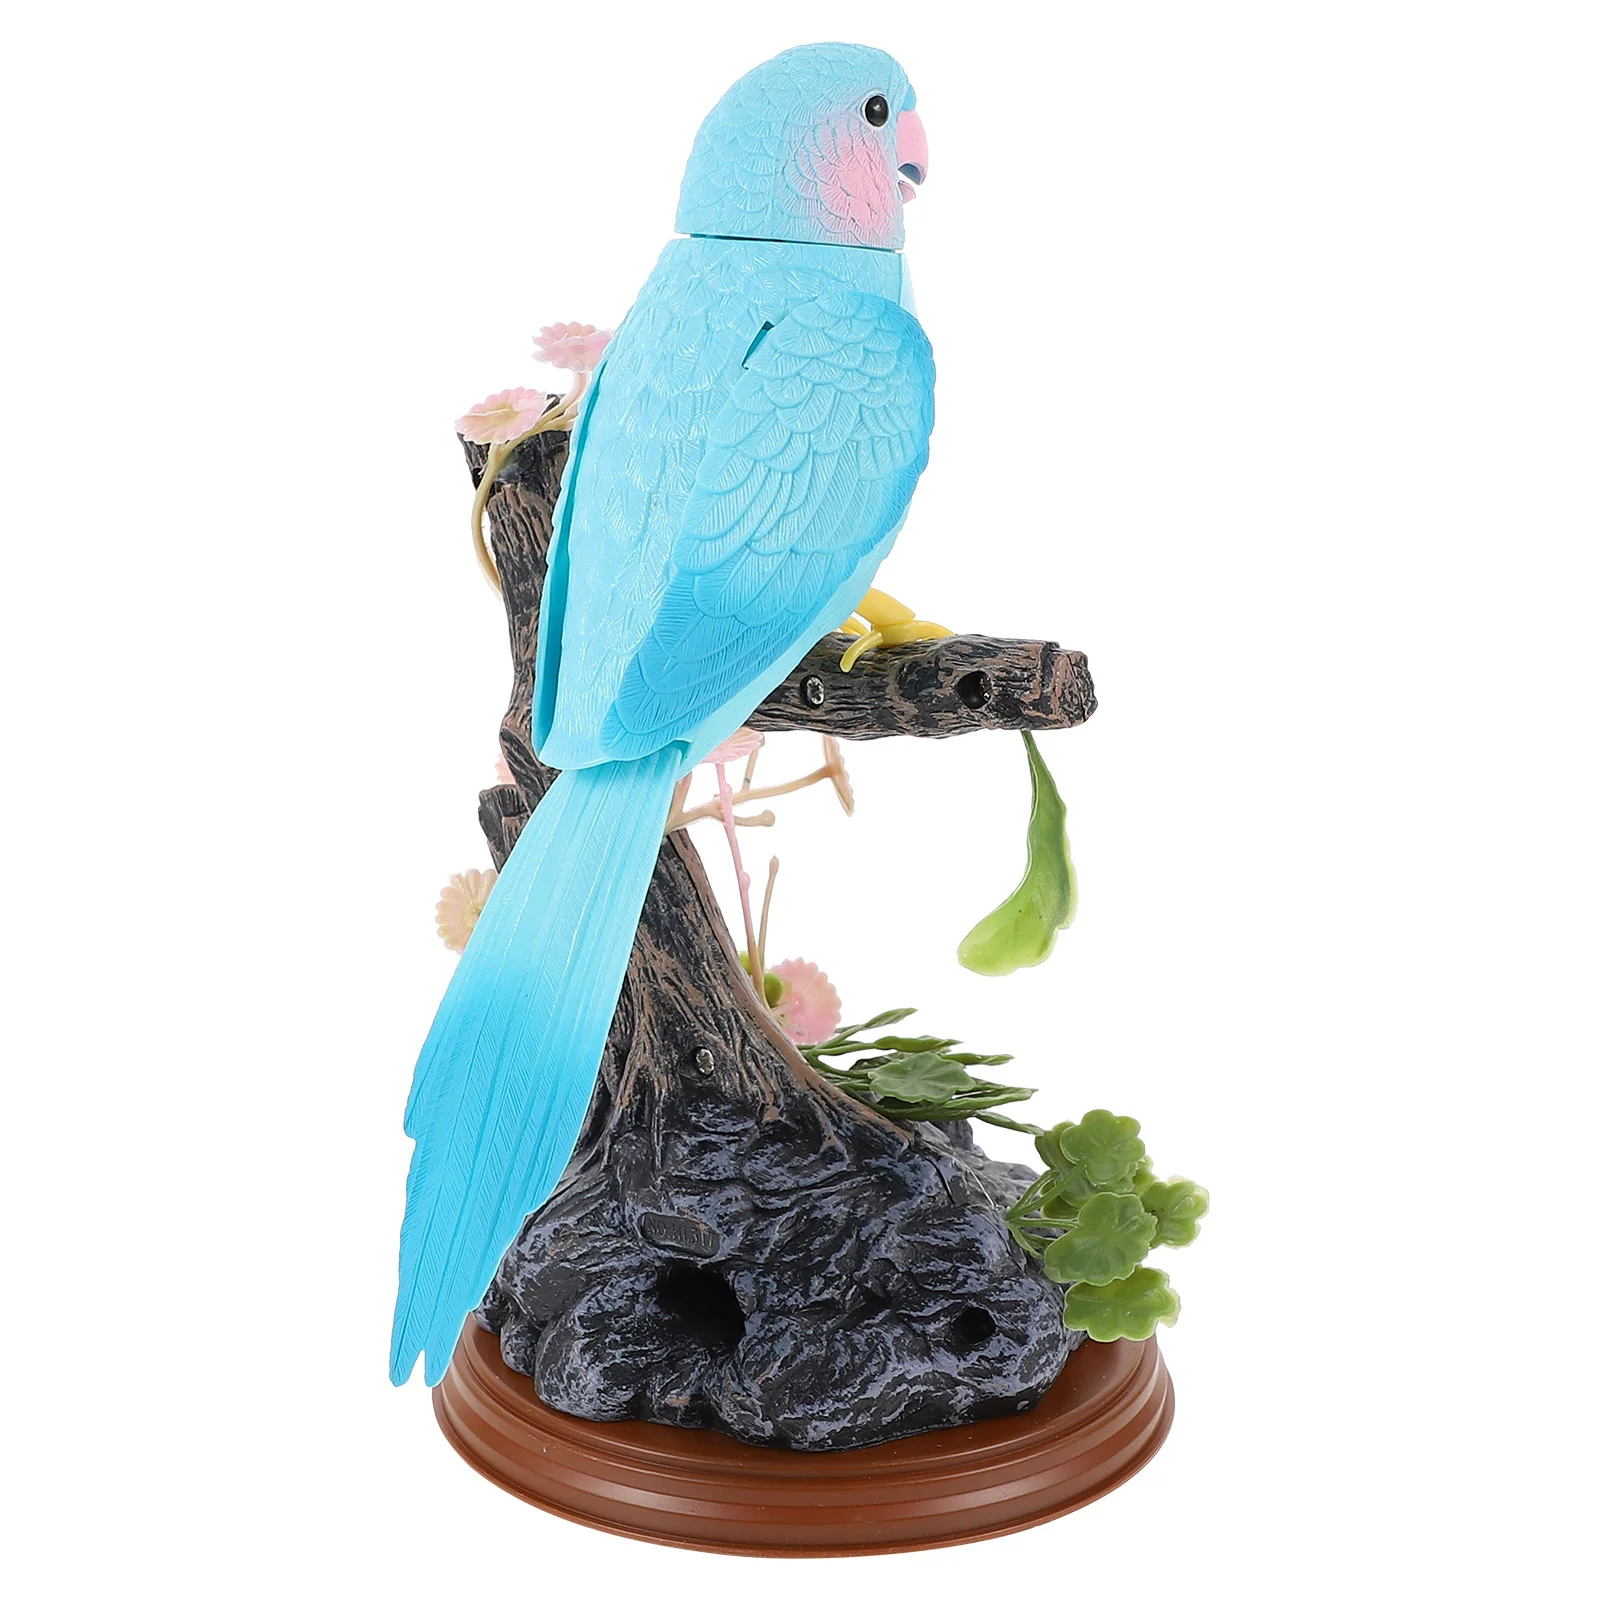 

Parrot Talking Bird Electronic Animal Kids Pet Birds Voice Recording What Sound Toys Speaking Say You Electric Control Repeat